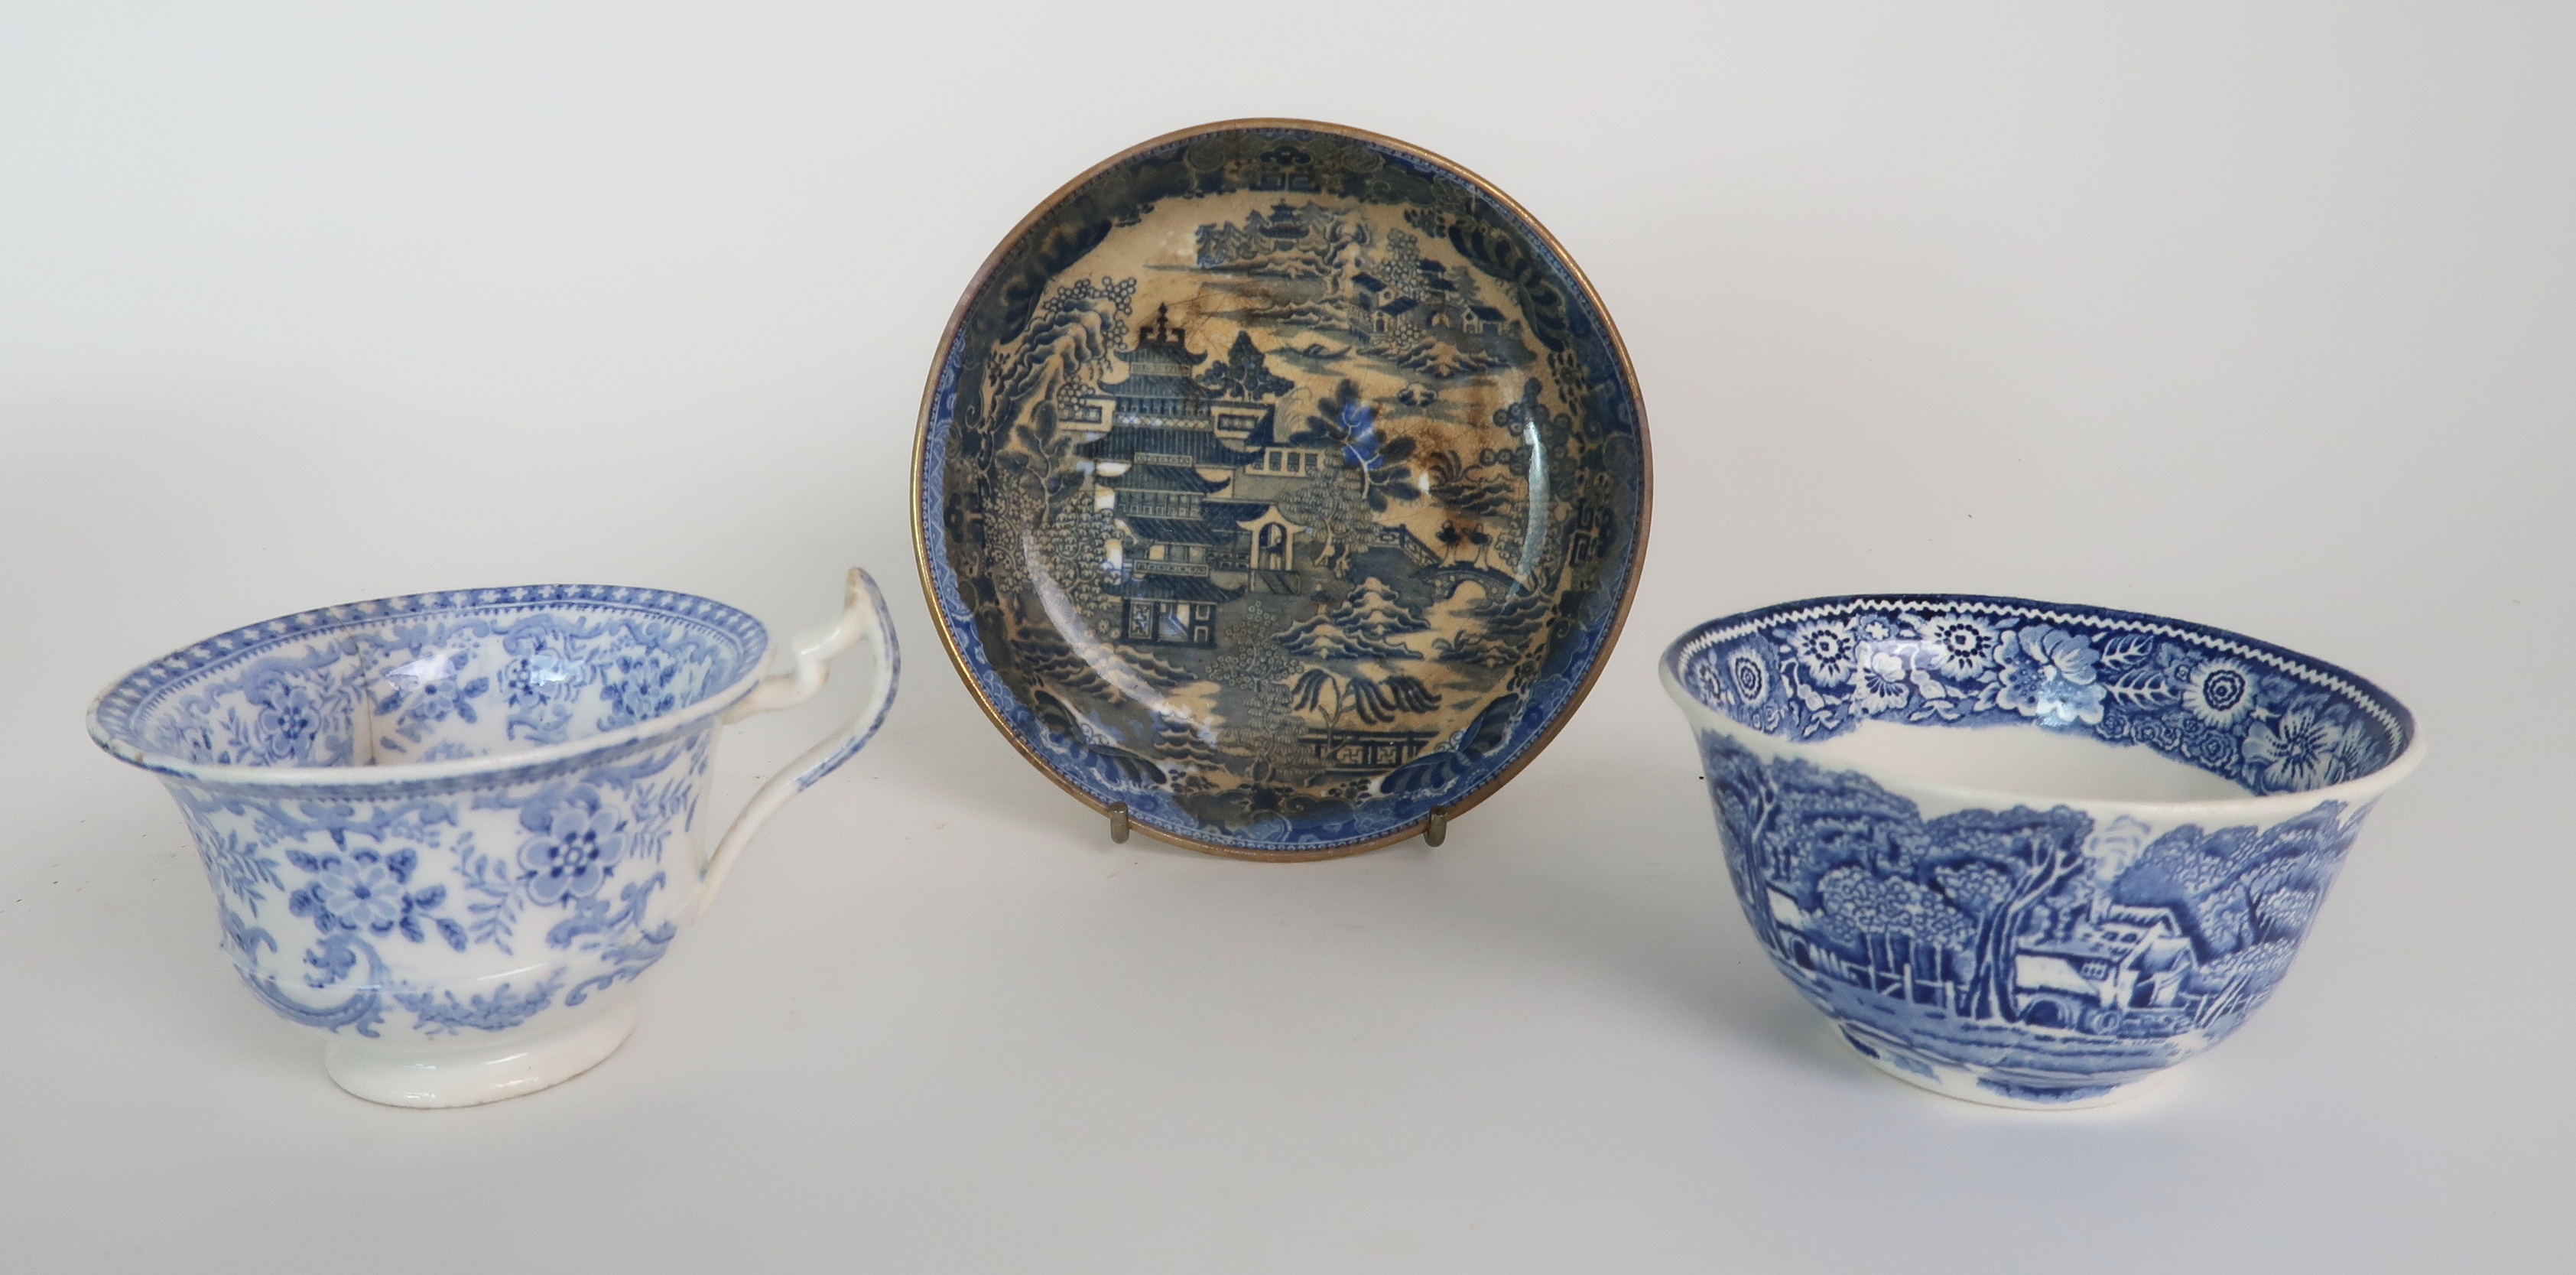 A COLLECTION OF ANTIQUE AND LATER ENGLISH BLUE AND WHITE PORCELAIN TEA/COFFEE WARES including - Image 12 of 20